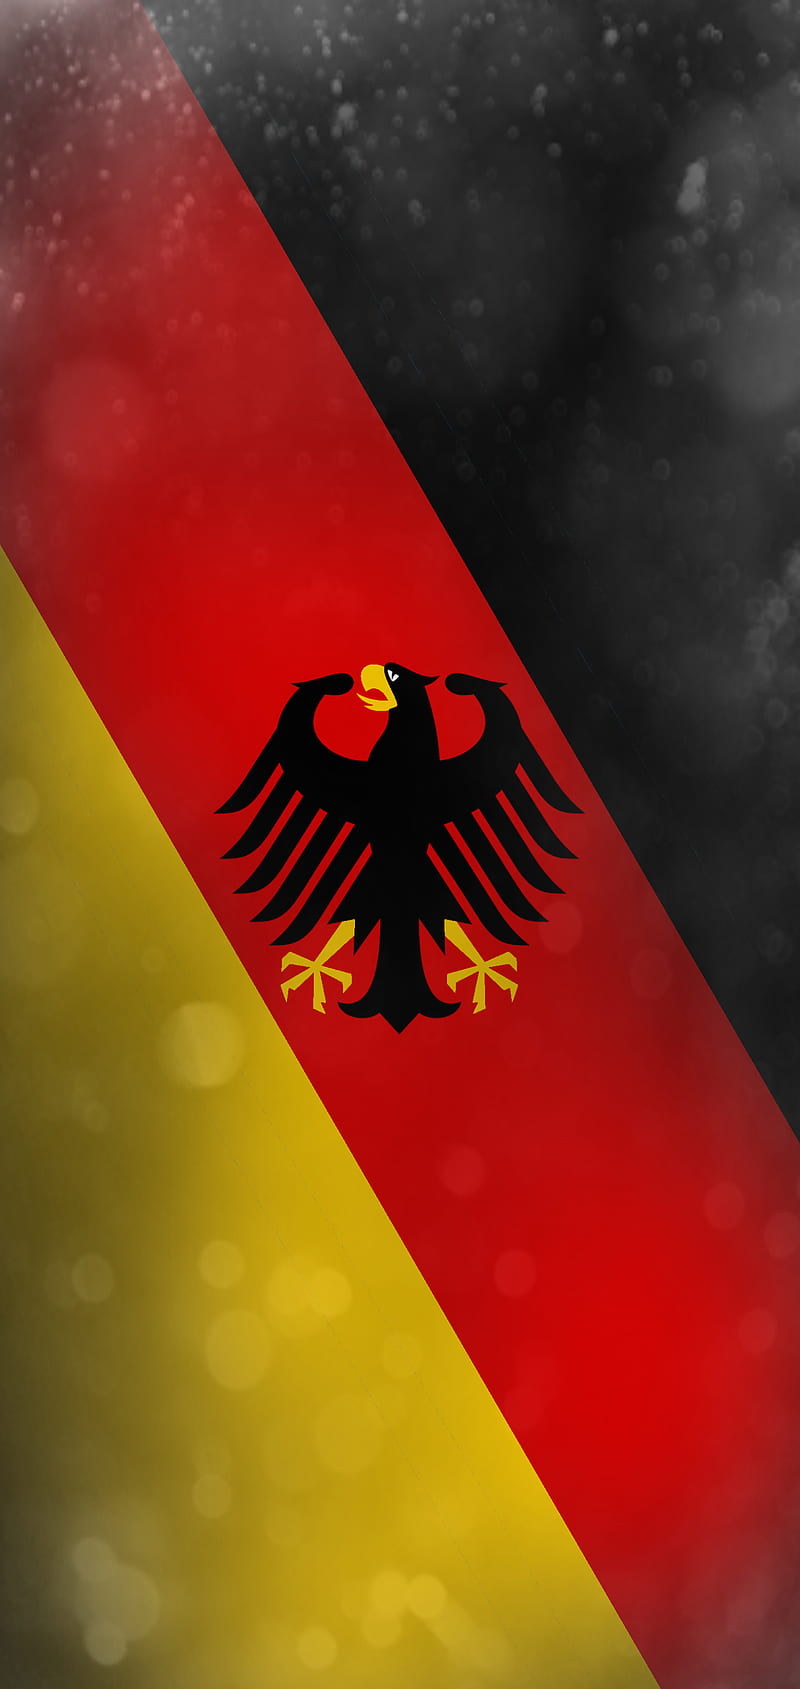 Download wallpapers 4k, Flag of Germany, geometric art, European countries, German  flag, creative, Germany, Europe, Germany 3D flag, national symbols for  desktop with resolution 3840x2400. High Quality HD pictures wallpapers